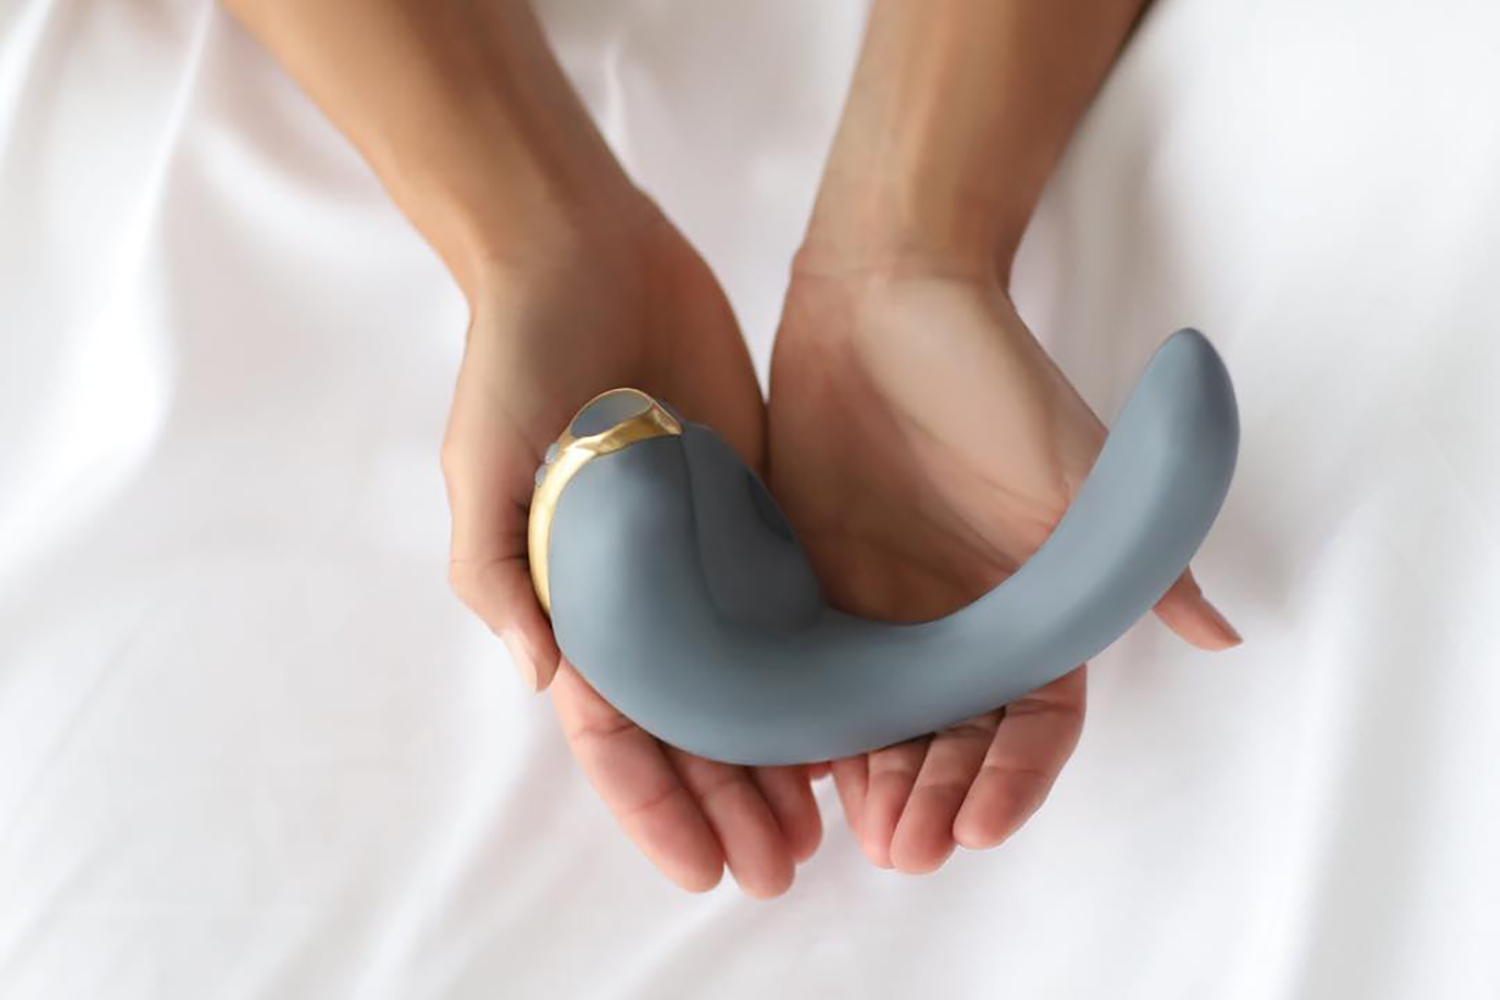 Lora DiCarlo's sex toy won an innovation award that was later revoked